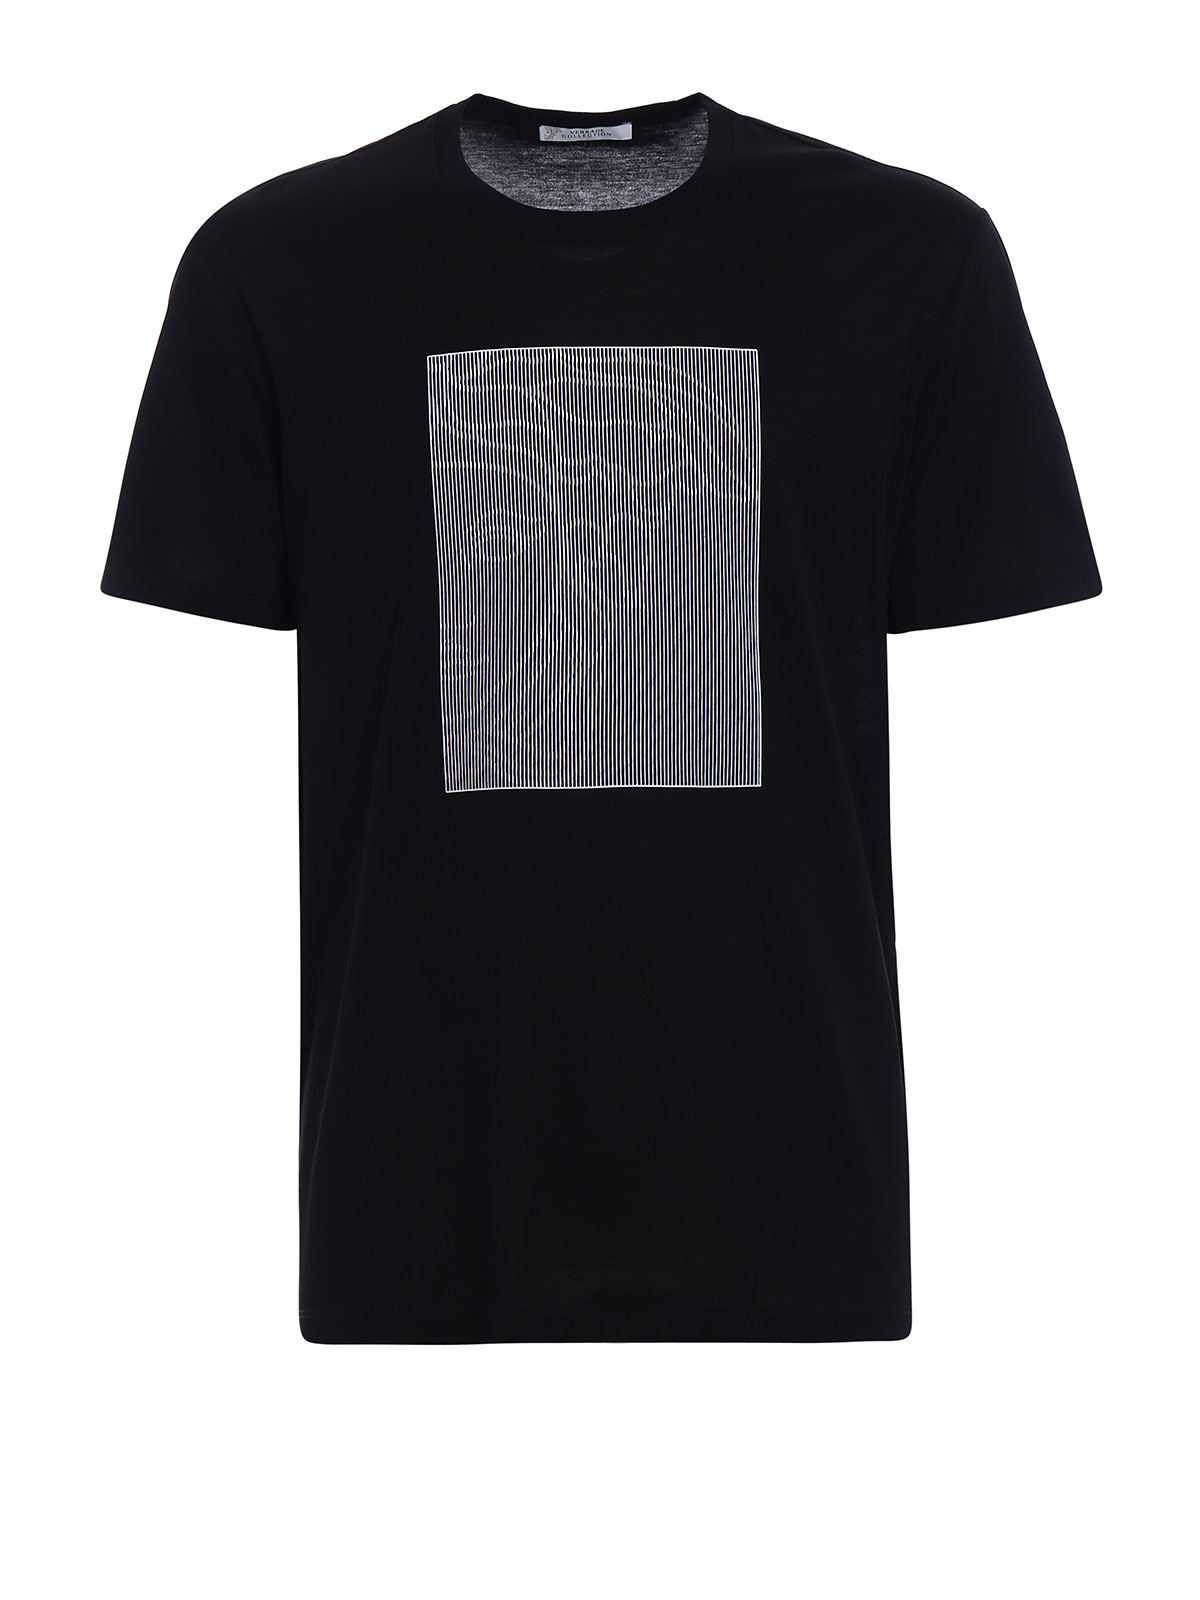 versace collection t shirt black